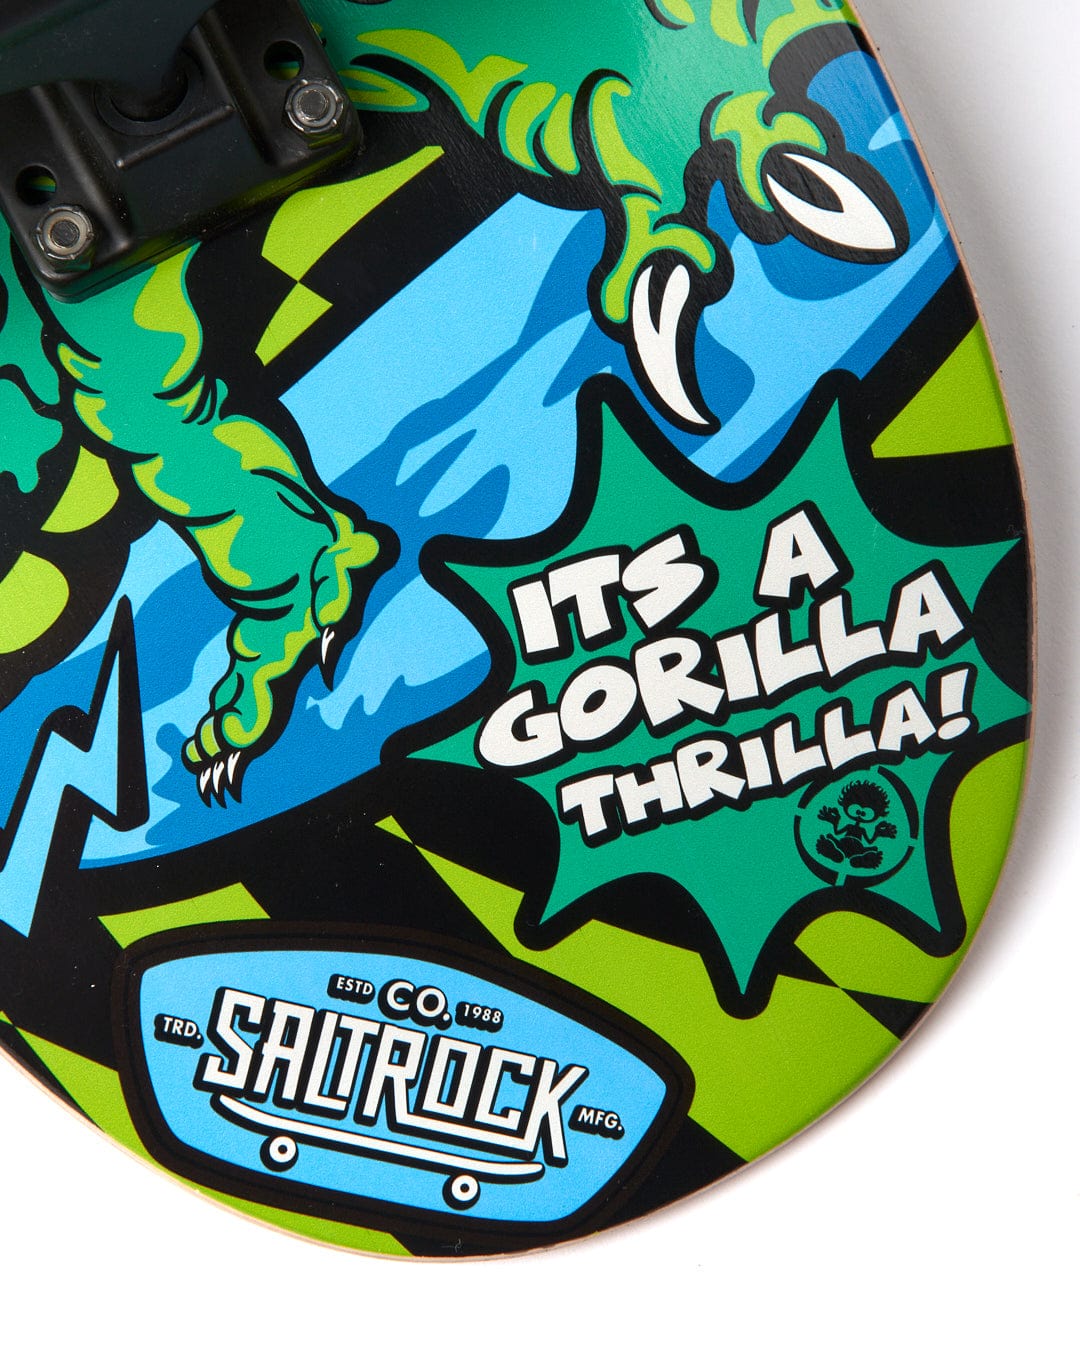 This durable Las Vega Smackdown skateboard sticker is perfect for your deck board.